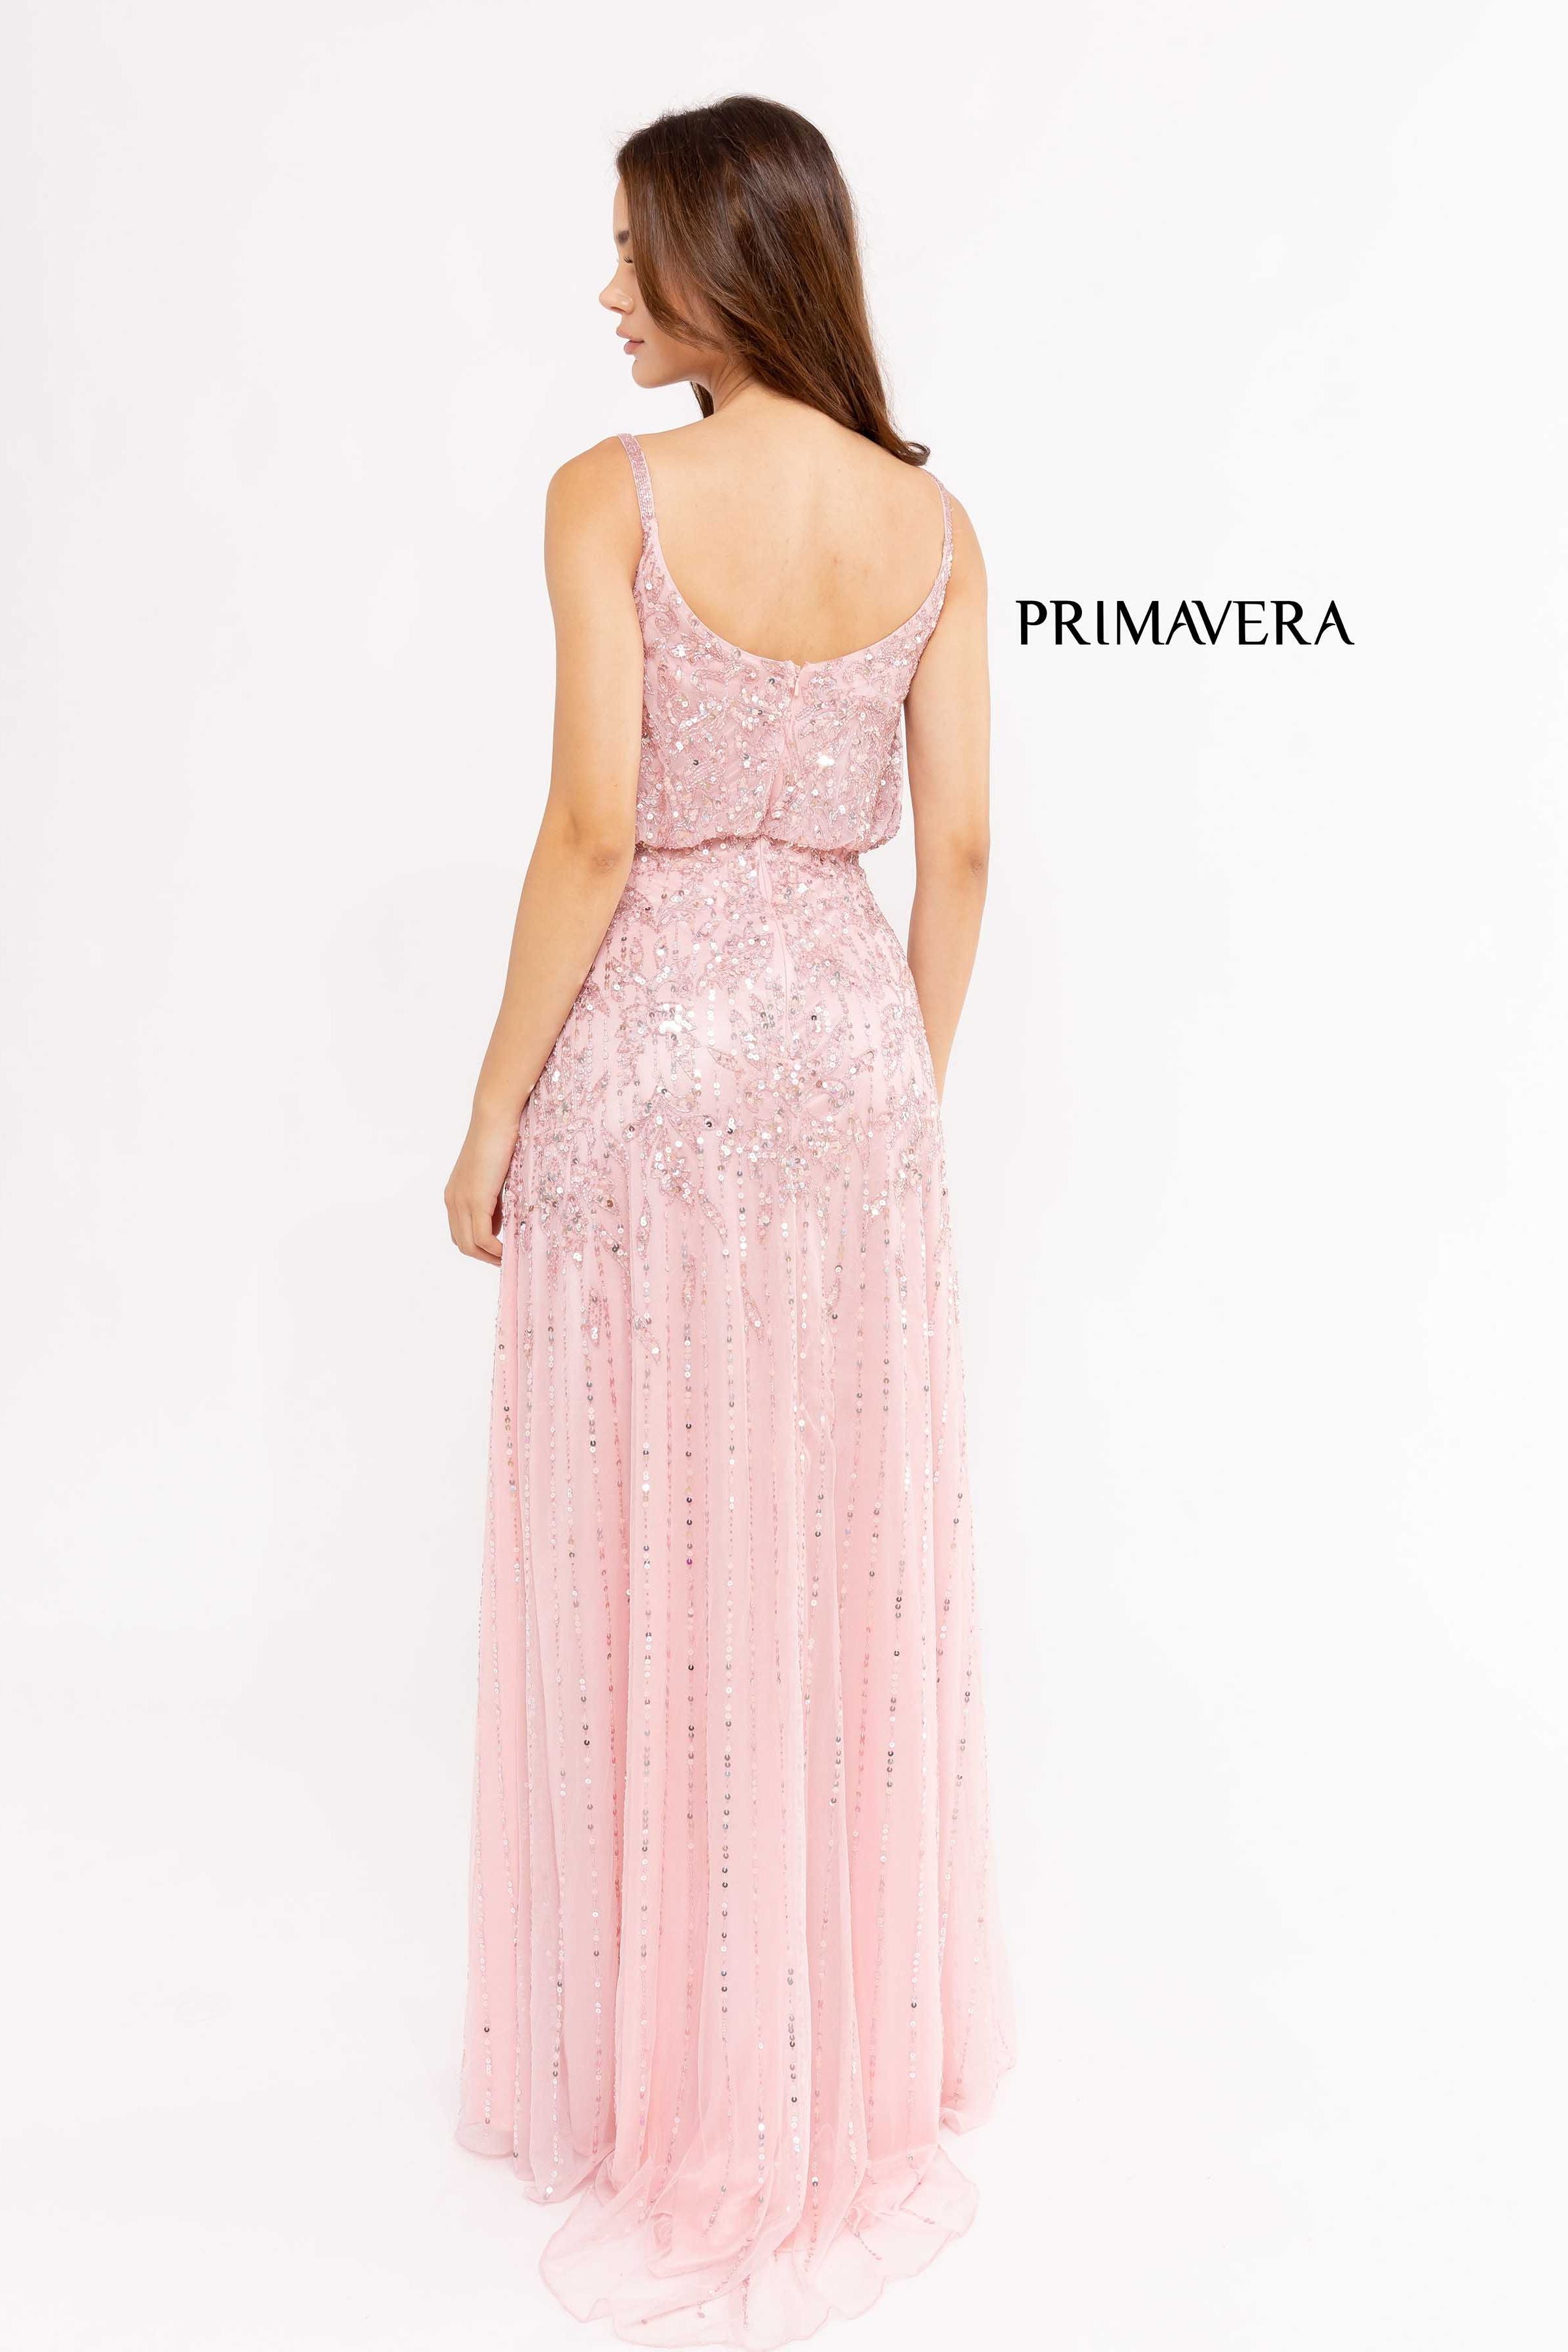 Blouson Sleeveless Chic Gown By Primavera Couture -13104